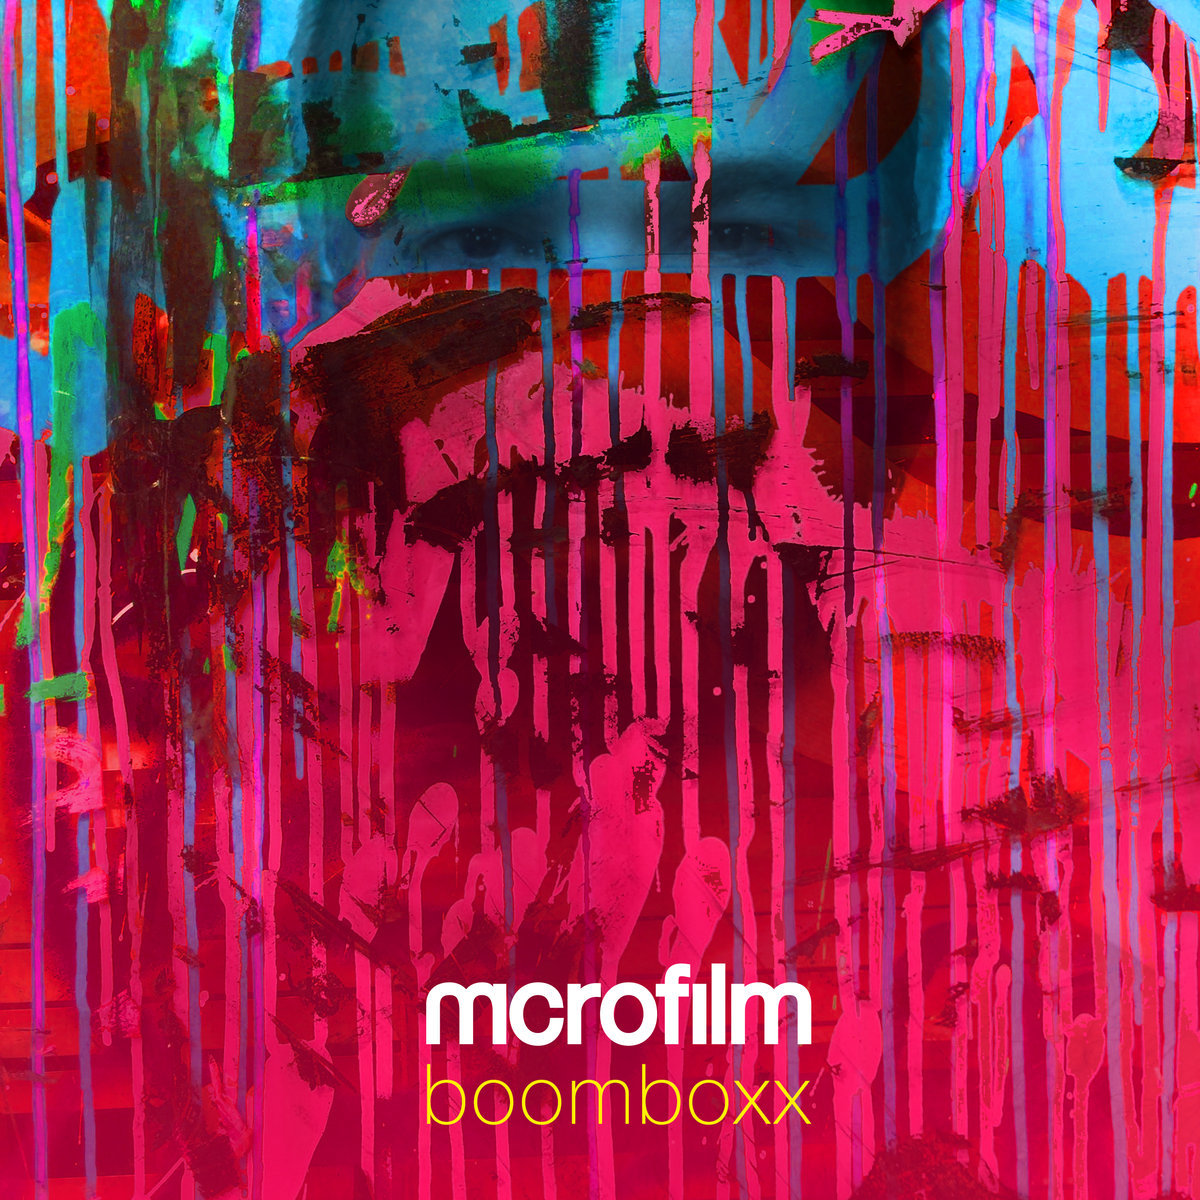 Free download: Pete Ellison’s remix of Microfilm’s “Boomboxx (I Love to Listen To)”